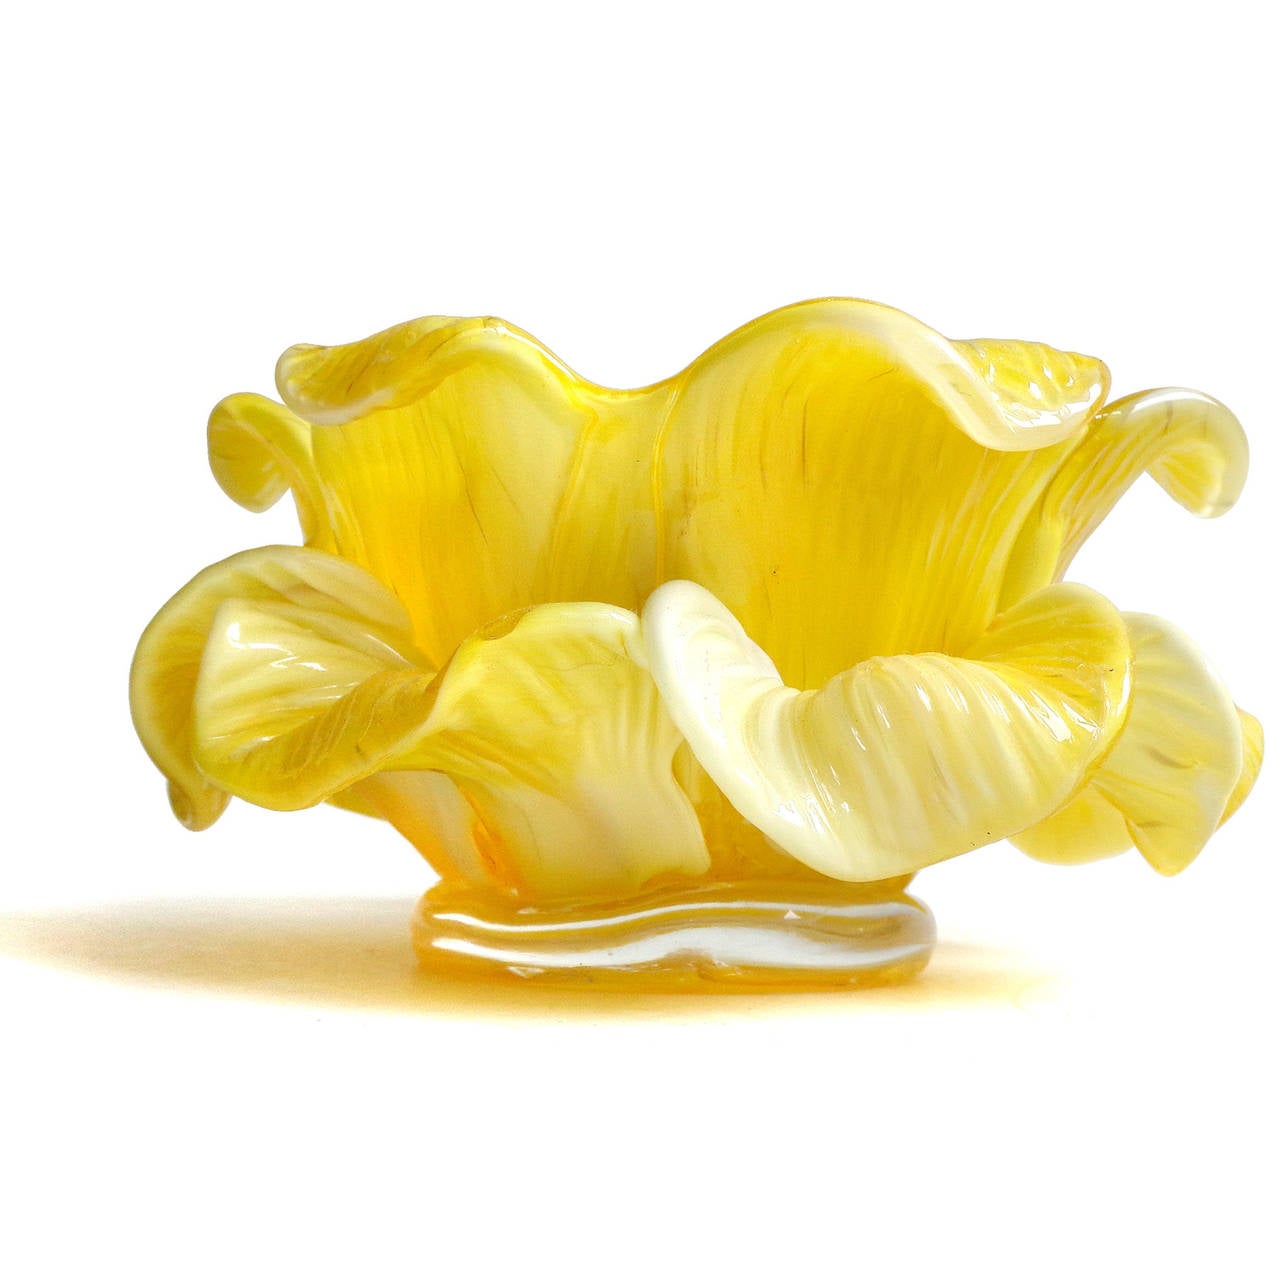 Free shipping worldwide! See details below description.

Beautiful set of Murano handblown, yellow with white double petals flower bowls. Attributed to the Fratelli Toso Company, circa 1950s. Each has a glass disk on the bottom, and mottled effect